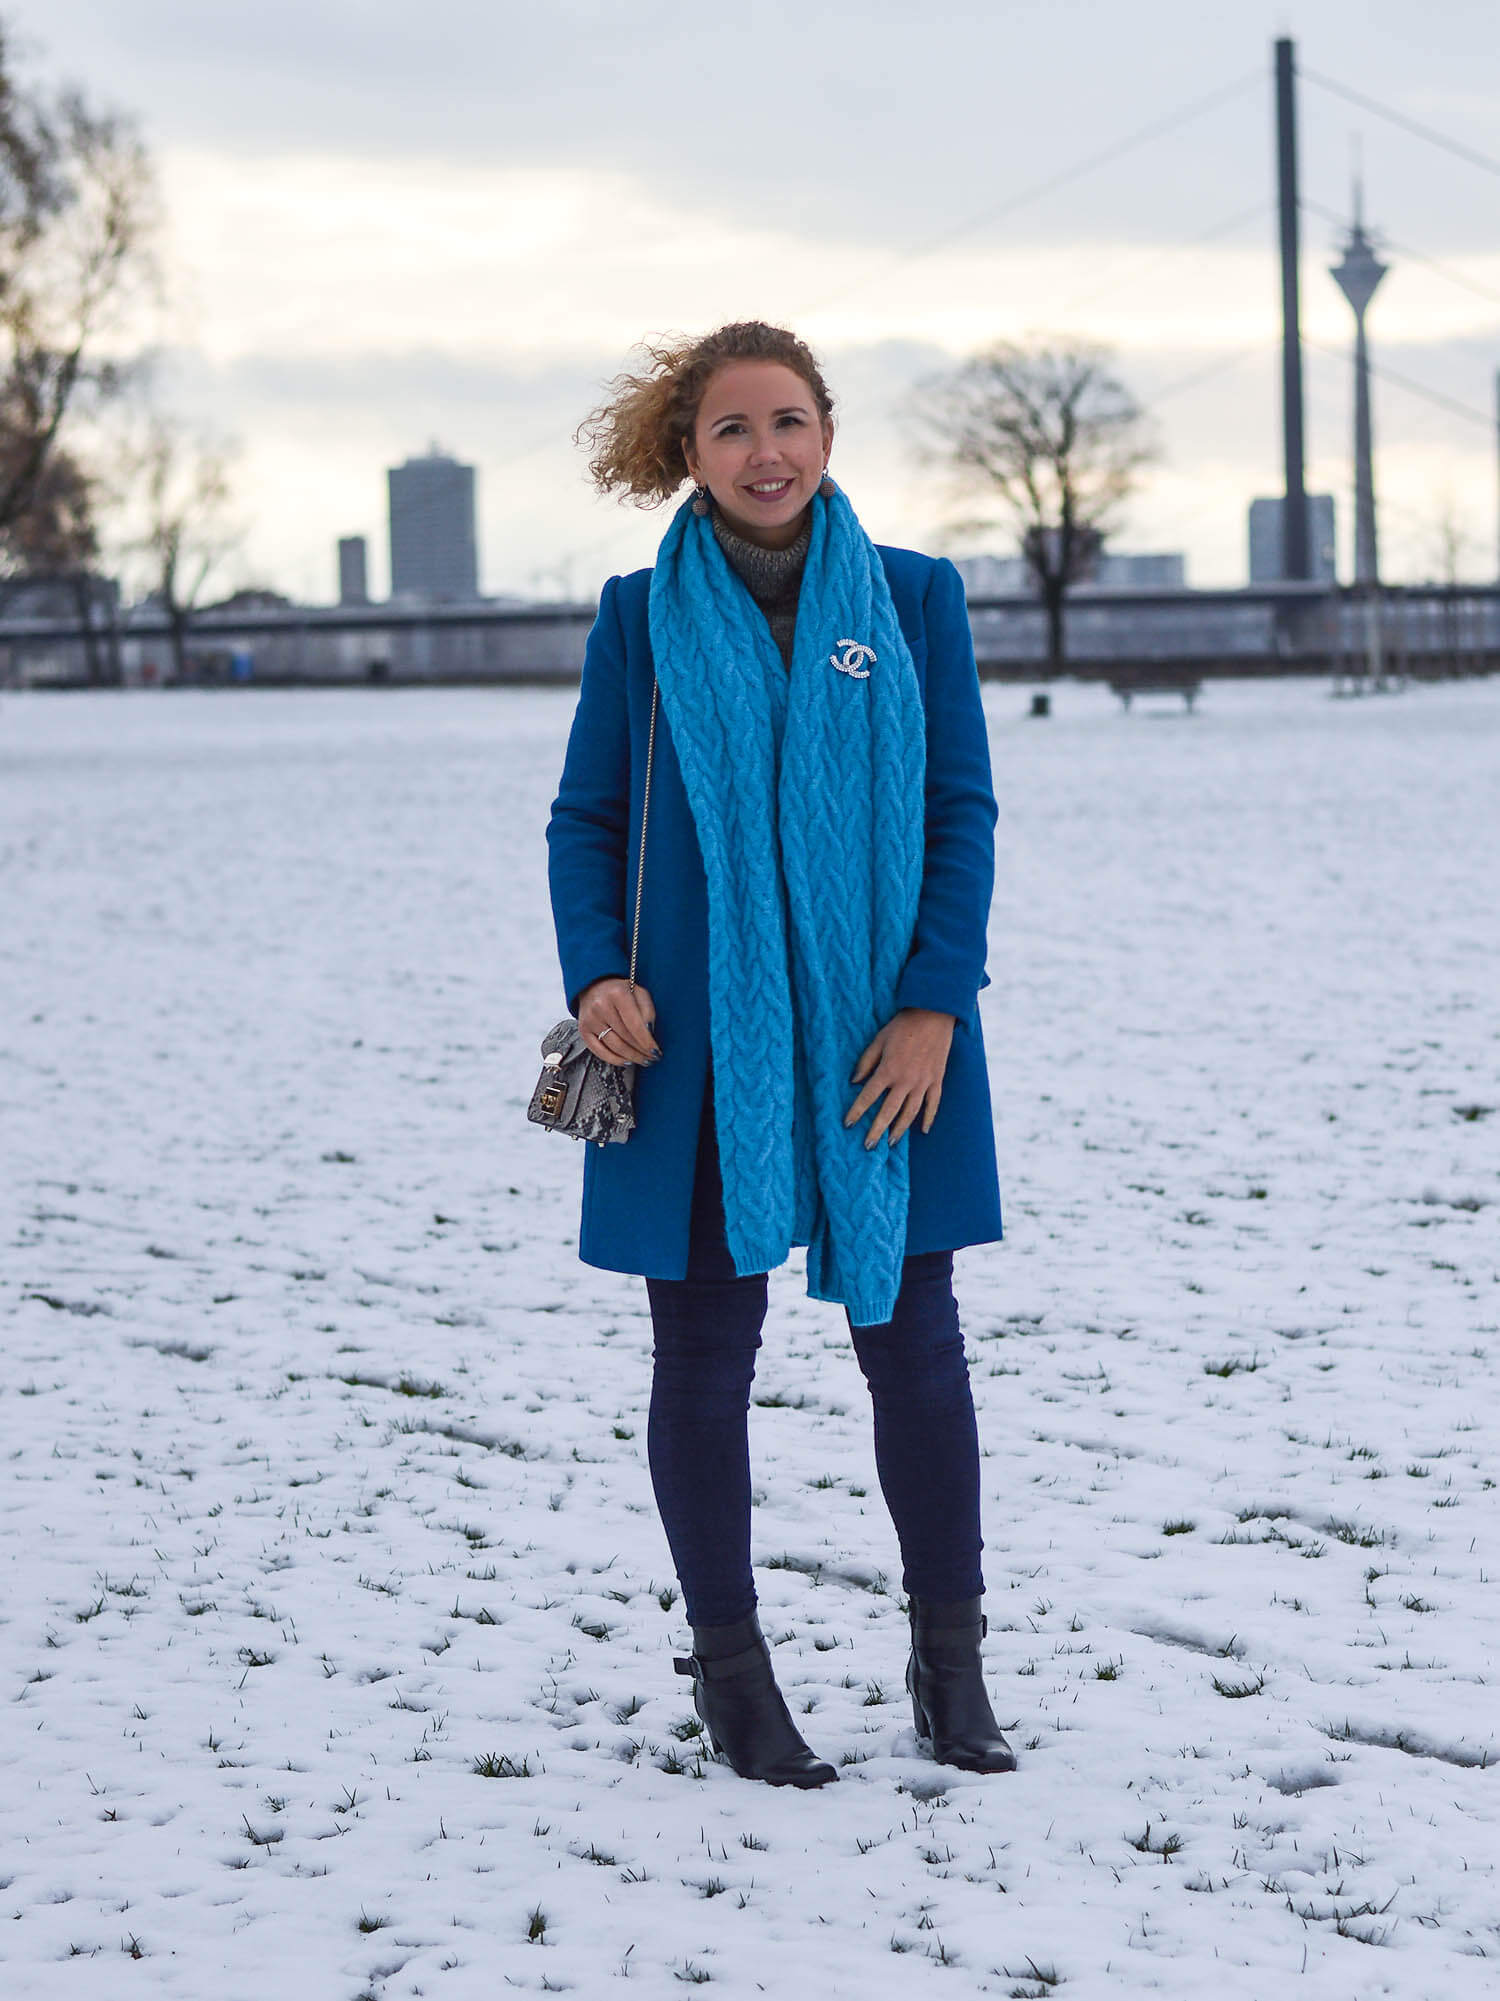 Kationette-fashionblogger-nrw-Happy-New-Year-Outfit-Azure-Blue-Coat-and-Scarf-for-a-snowy-day-in-Dusseldorf